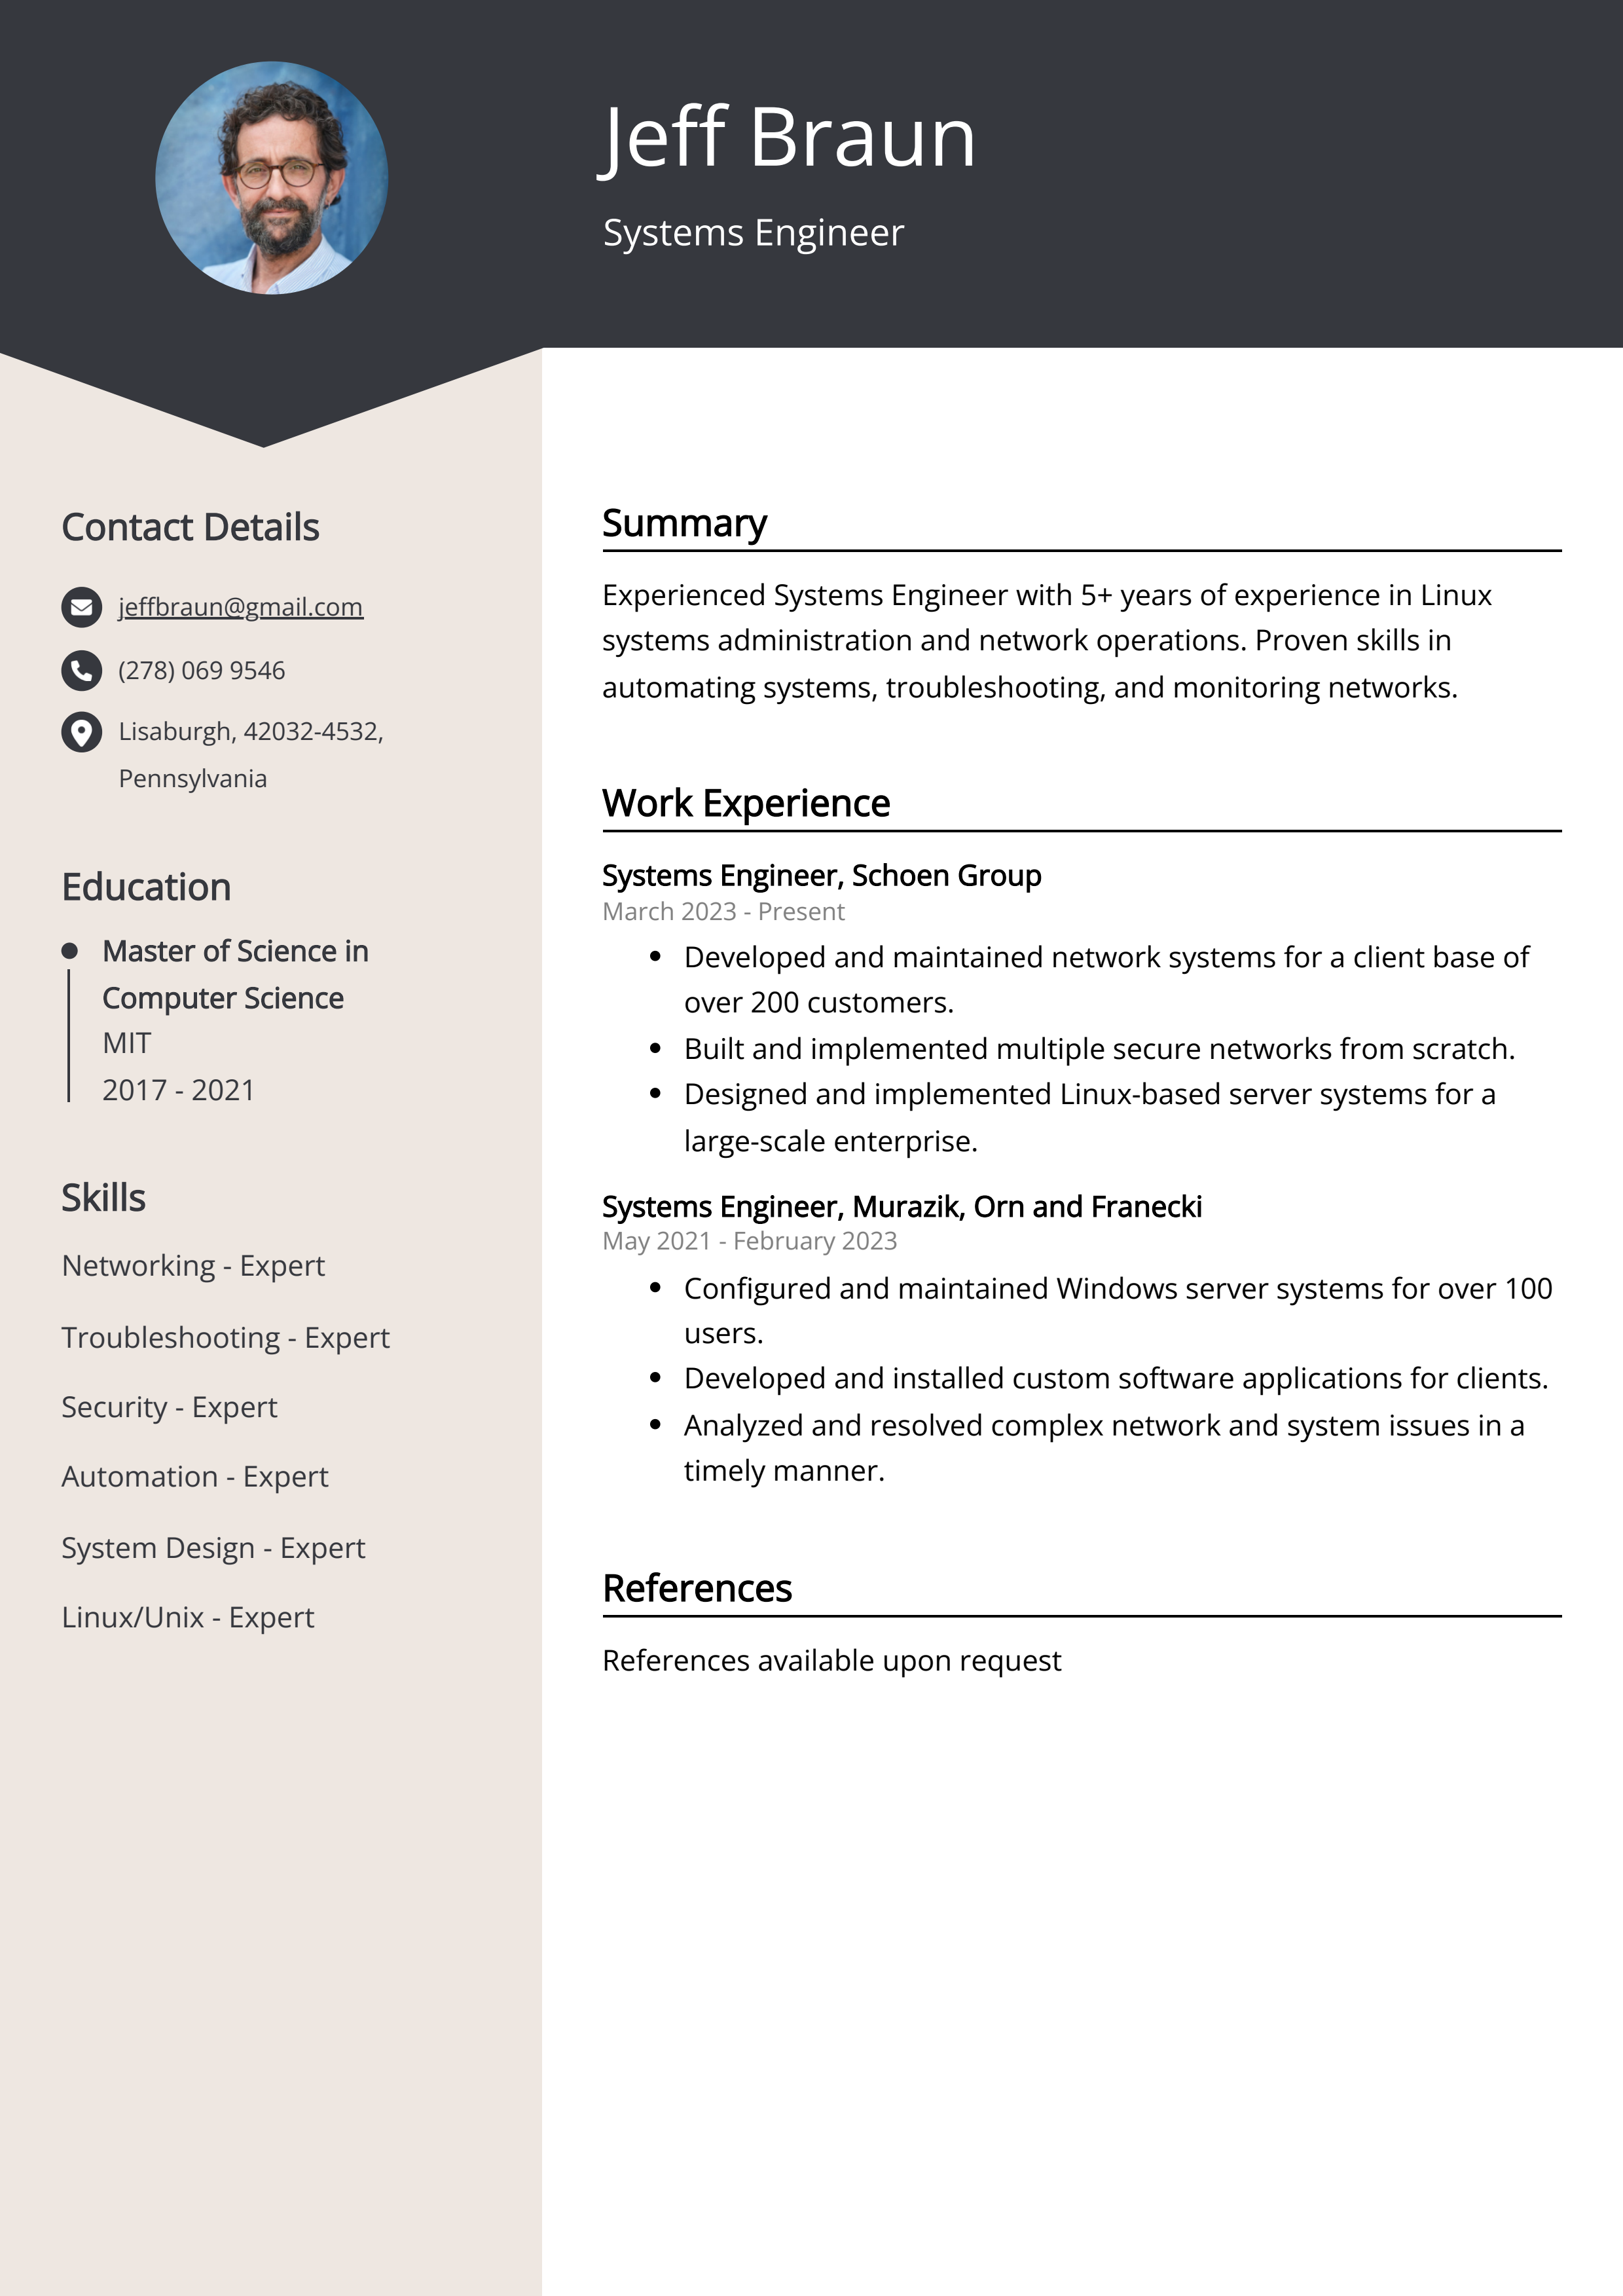 Systems Engineer CV Example